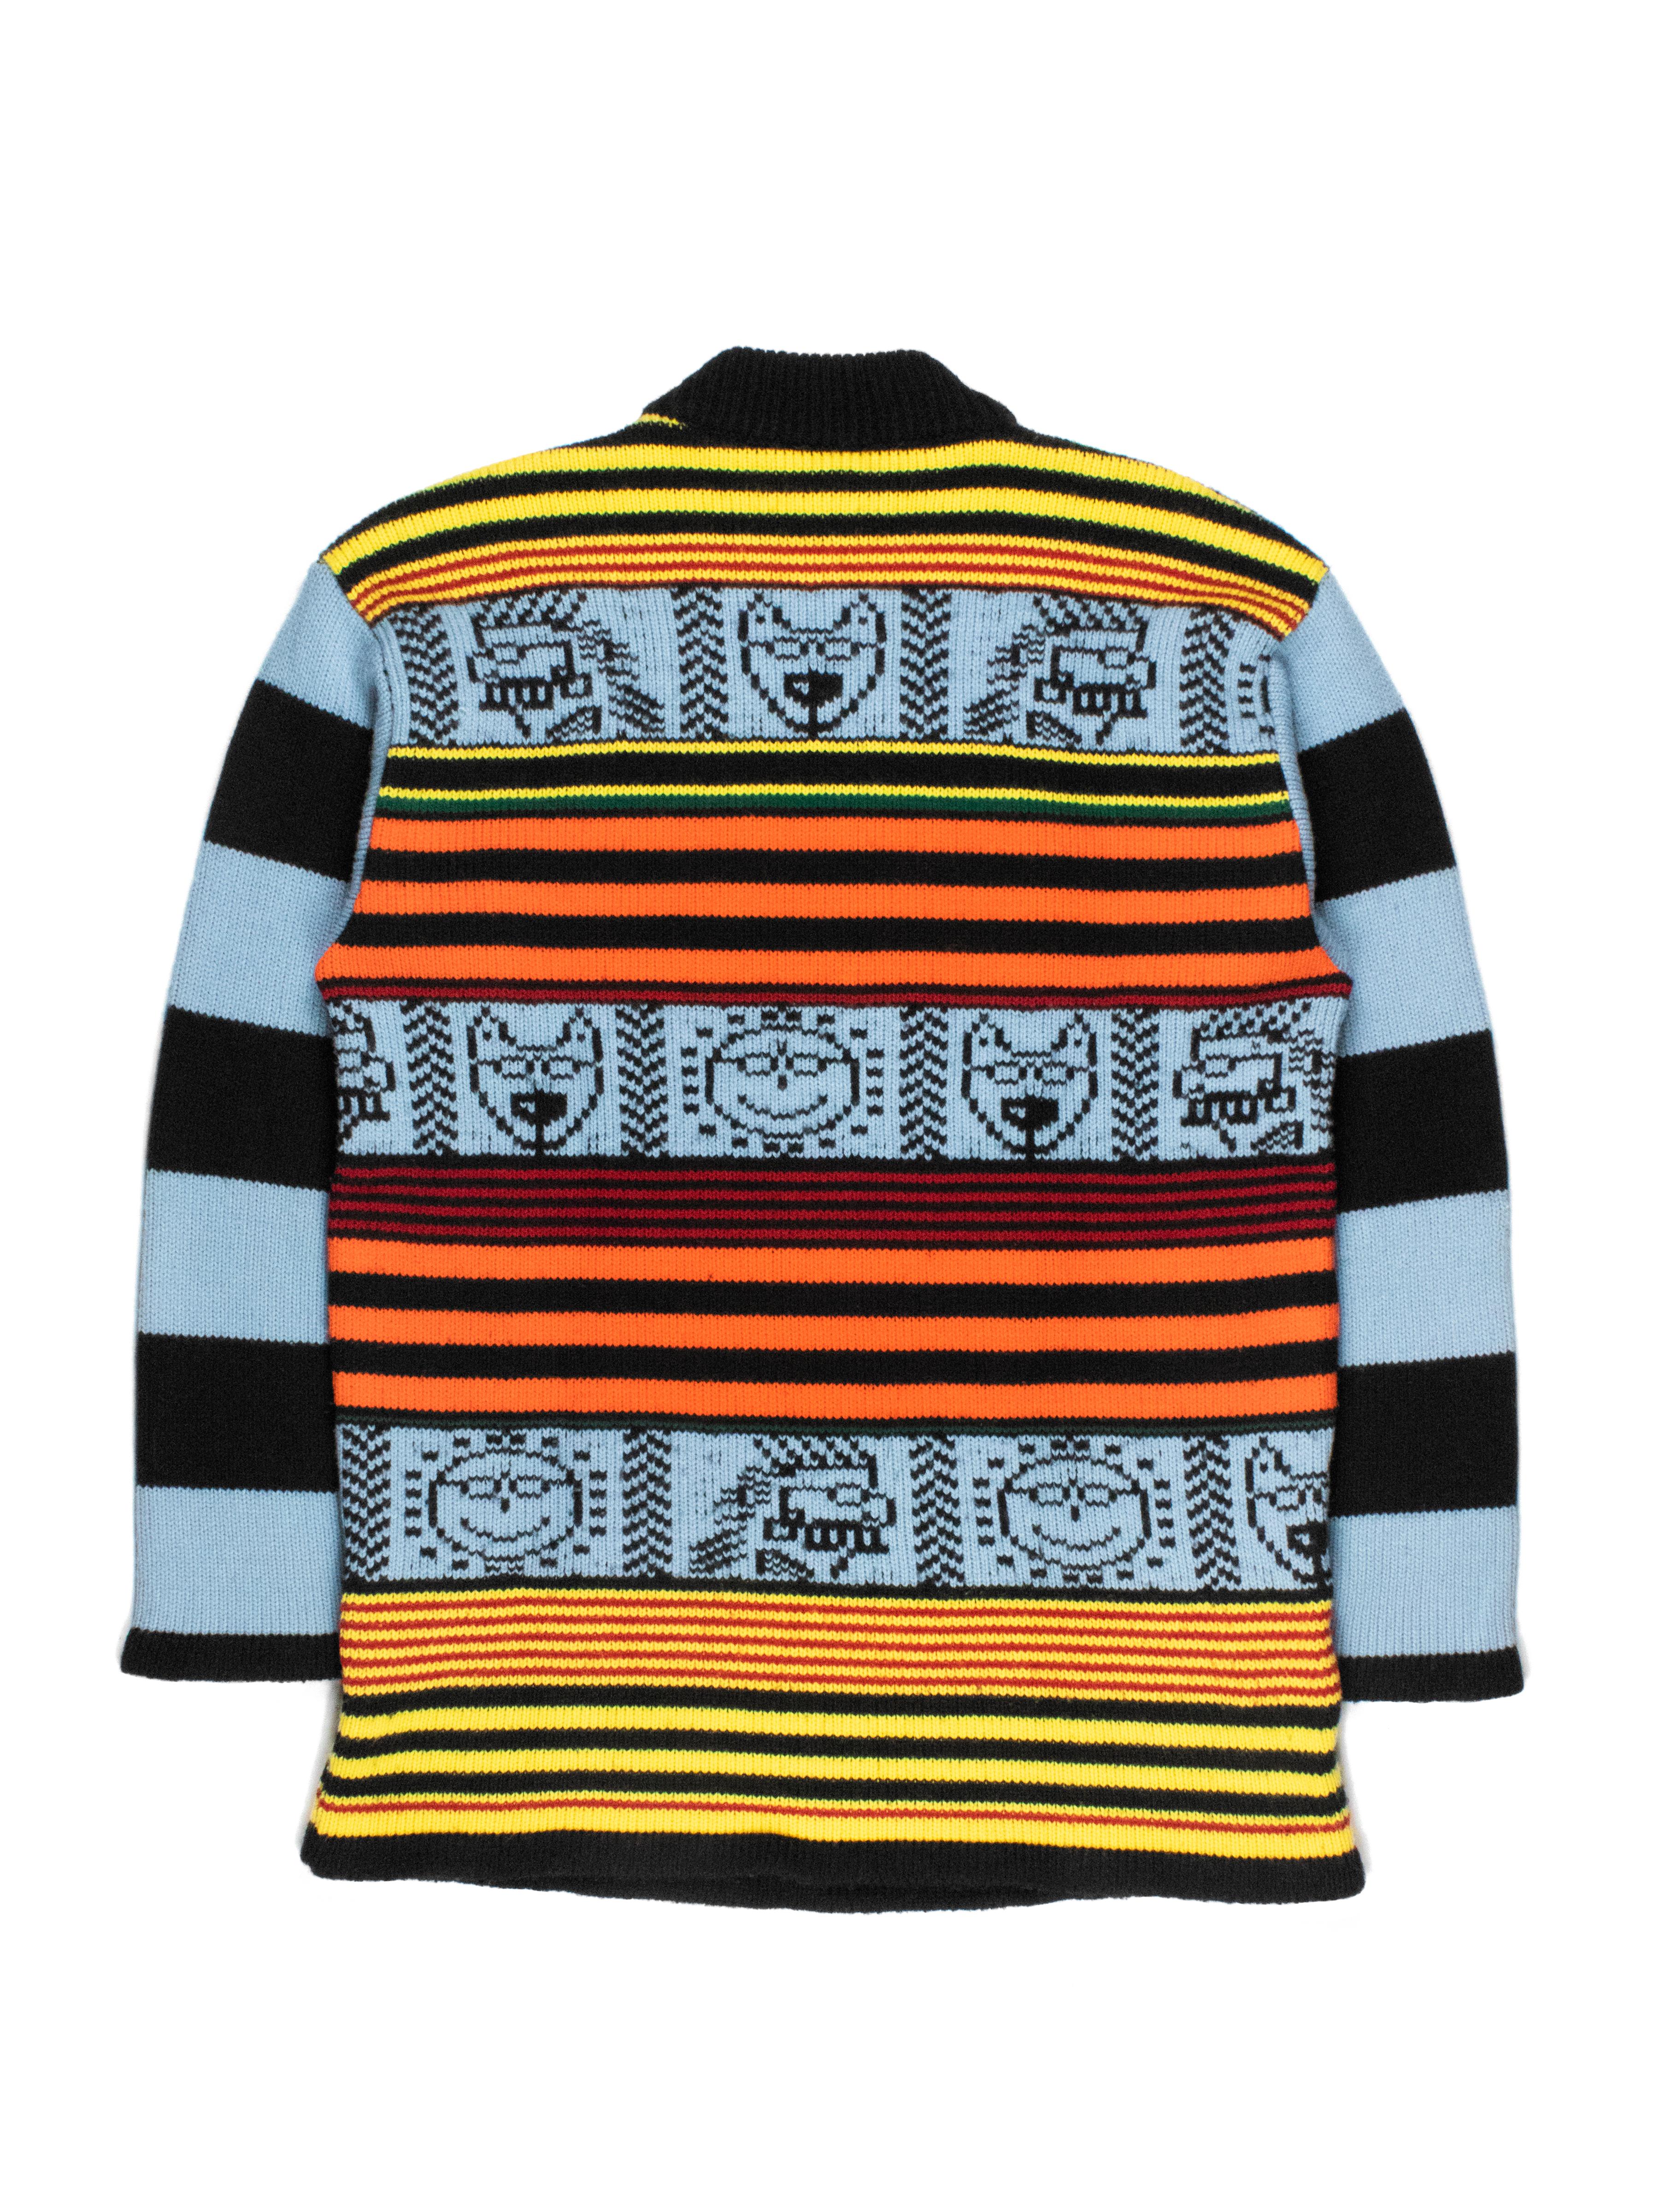 Walter’s fall 1988 collection borrowed from an eclectic blend of influences. Hand-drawn pictograms derived from ancient Aztec and Mayan paintings were a prevalent experiment, and can be seen on this sweater, channeled into the visuals of his pet dog